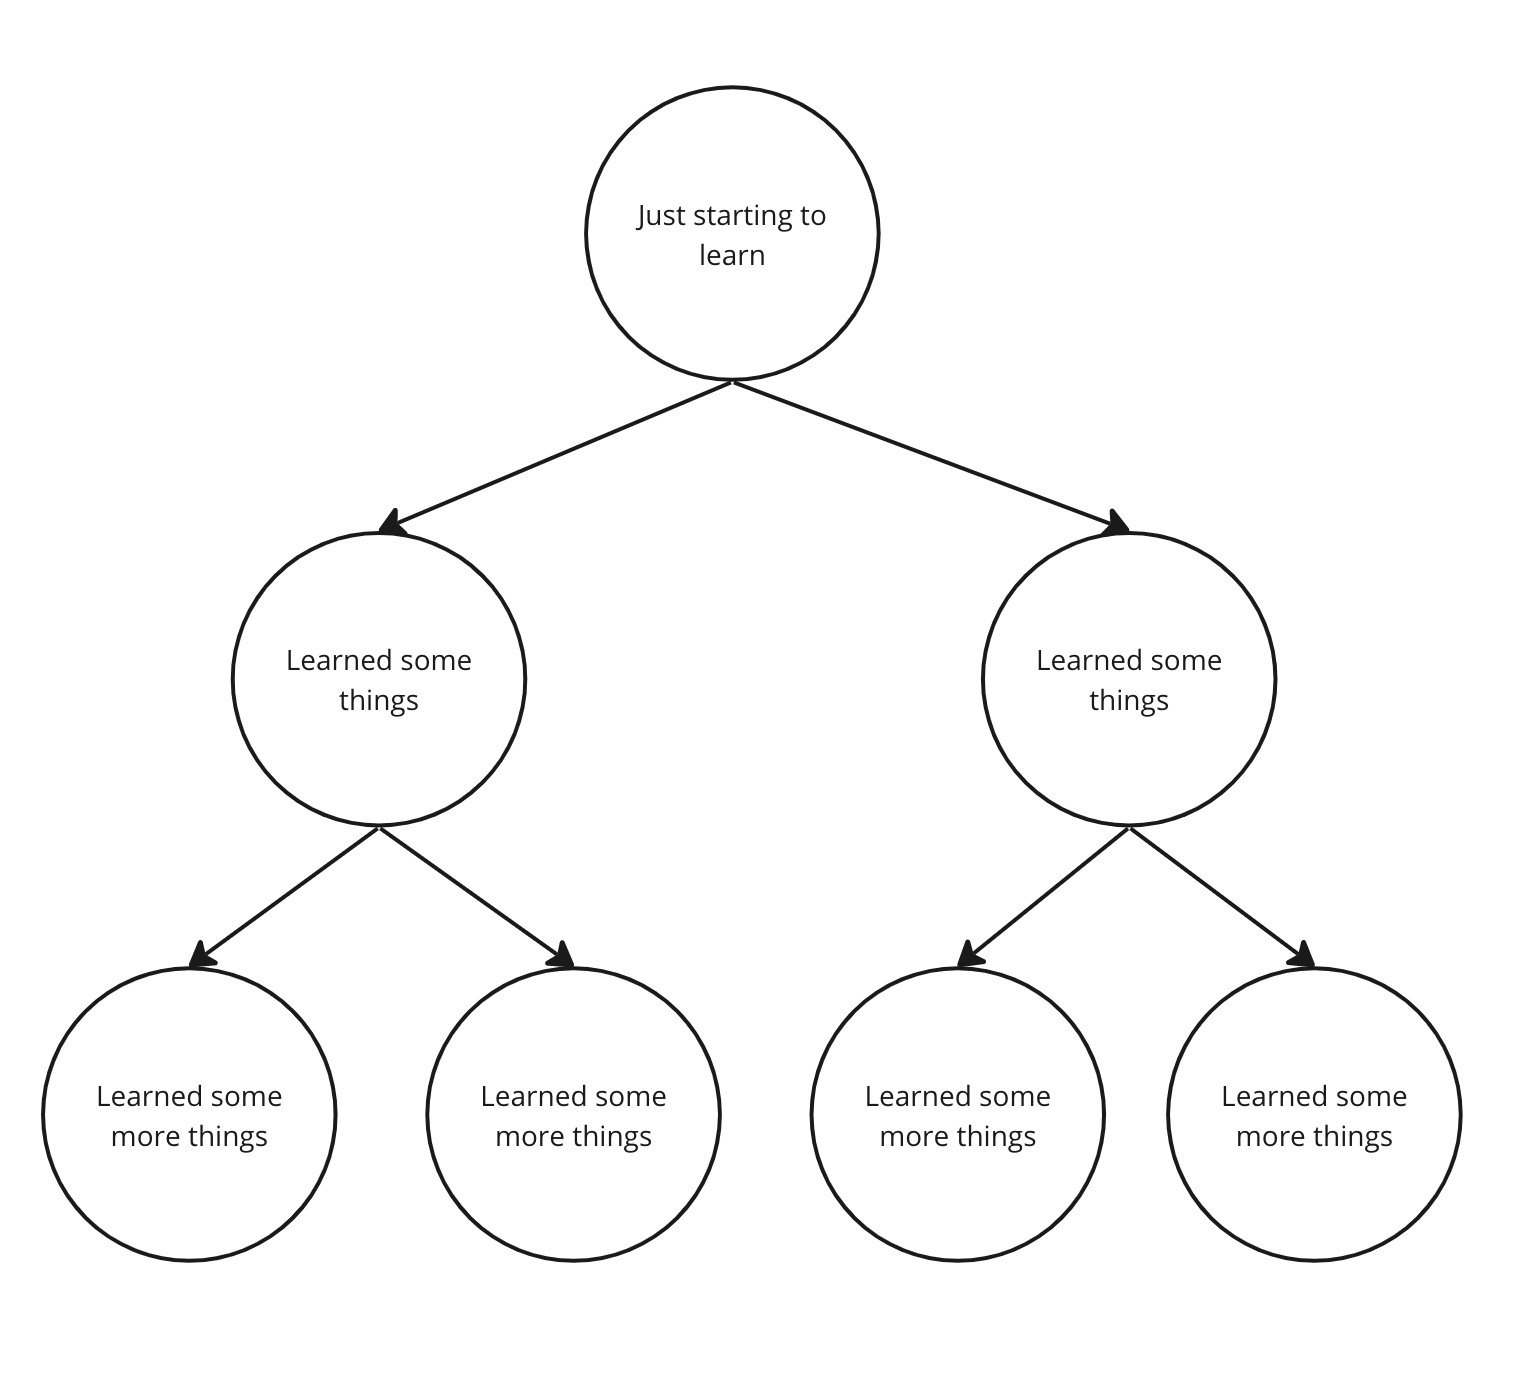 The graphic is a hierarchical tree-structured diagram that begins with a single node at the top, labeled "Just starting to learn.” Two nodes, labeled "Learned some things,” branch downwards from the initial node, one to the left and one to the right. Each of these two nodes further branches into two separate nodes, each labeled "Learned some more things.” This forms a final row of four nodes. Thus, the graphic visually represents a process of learning and knowledge expansion.